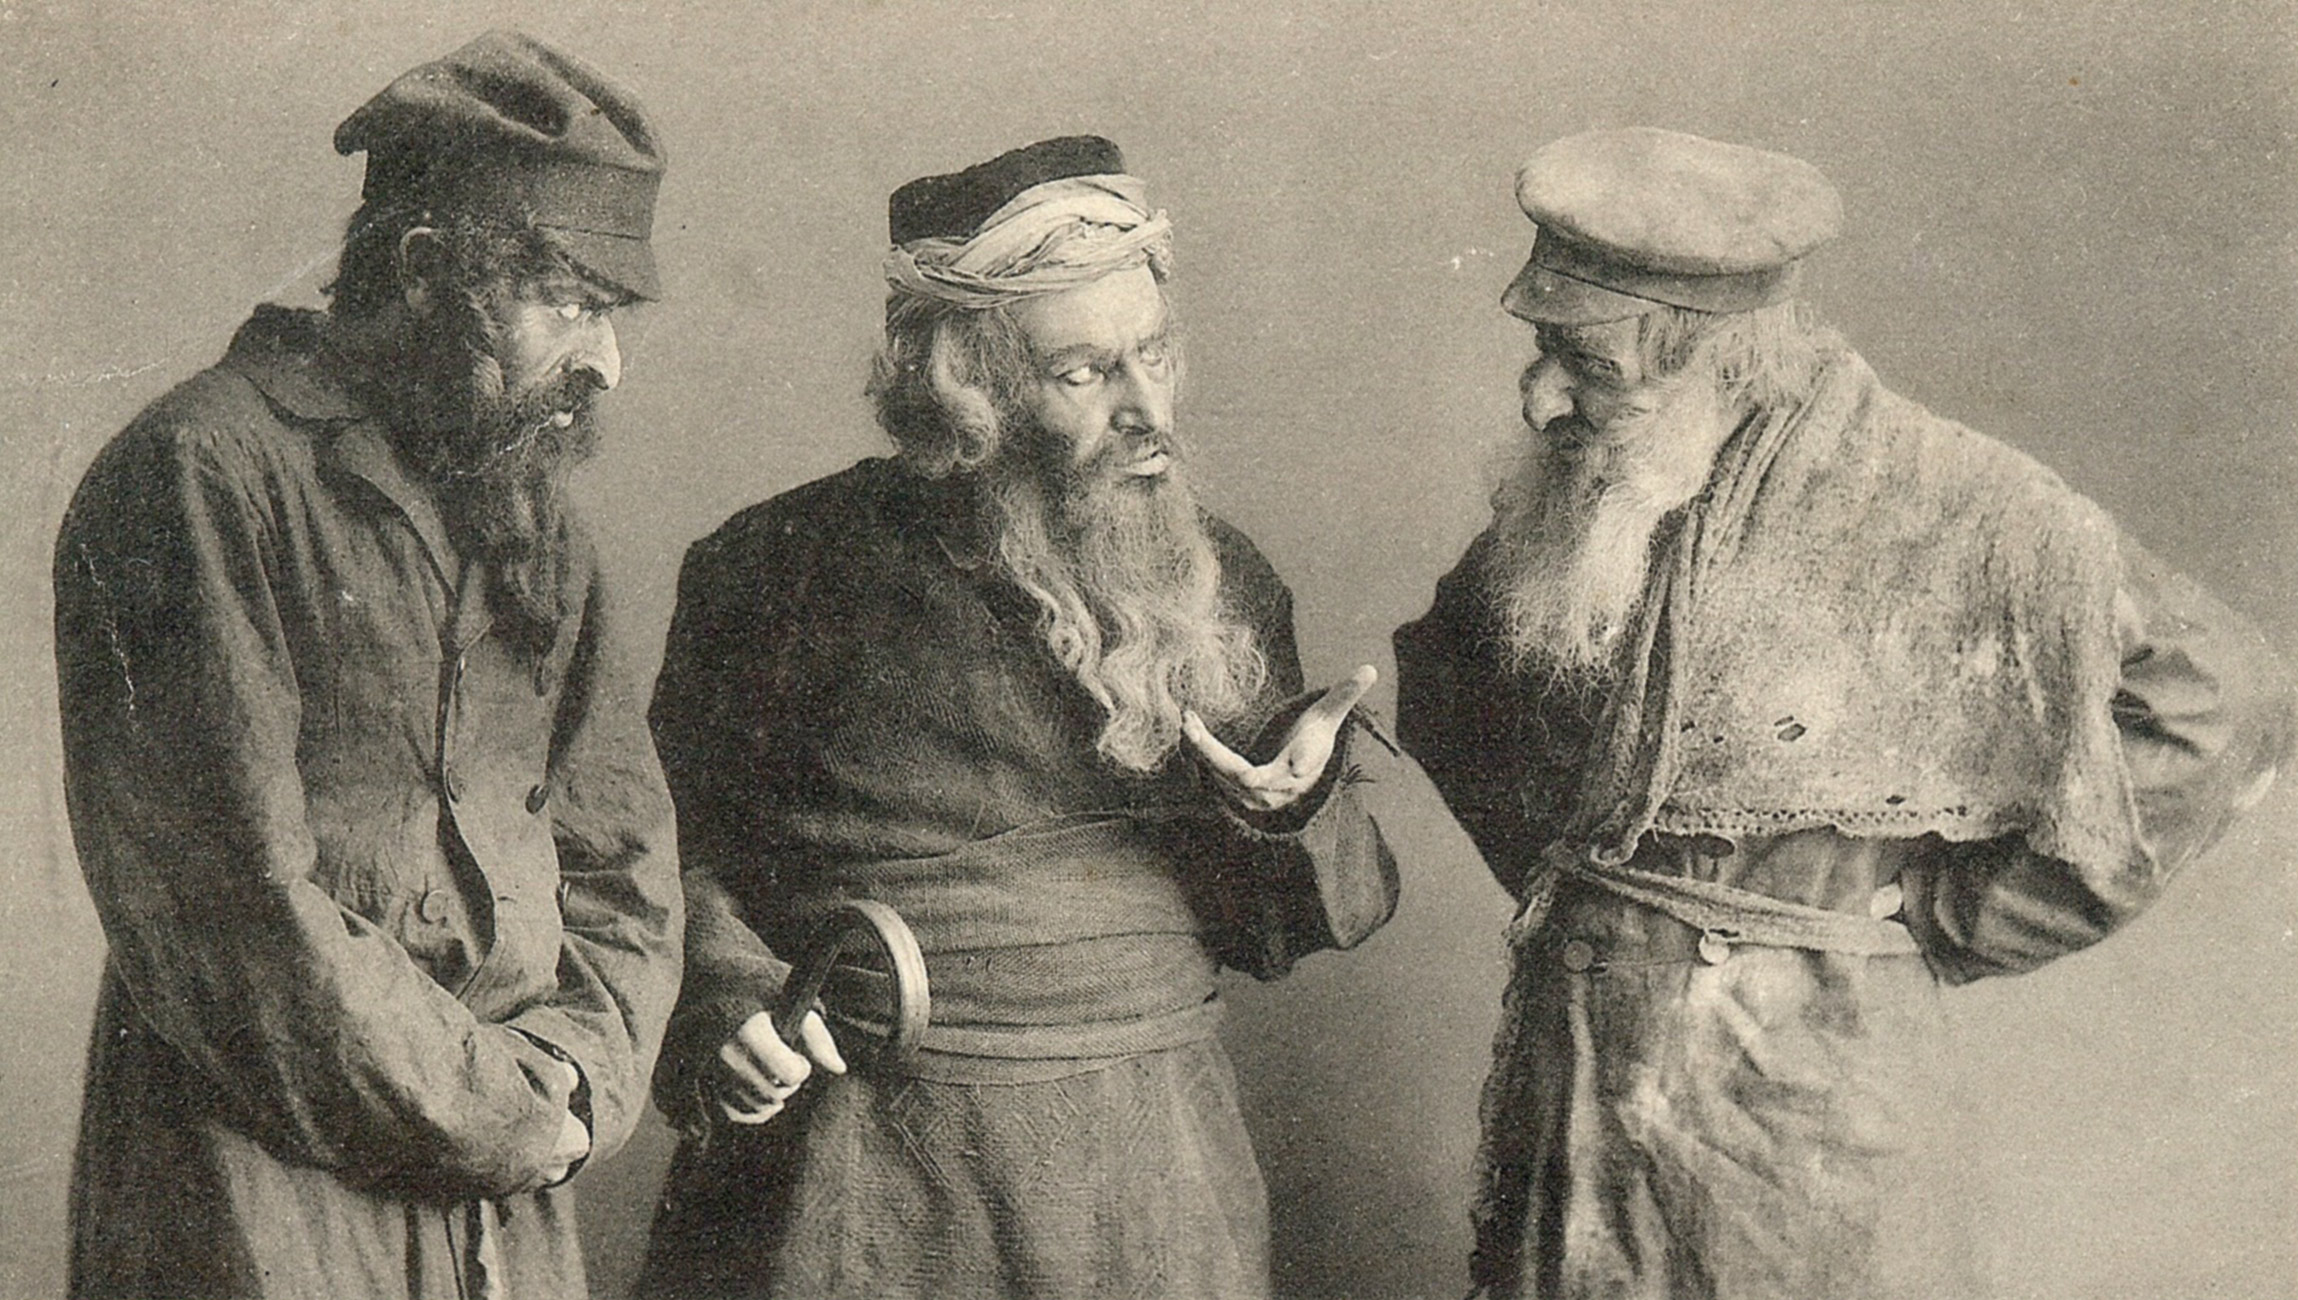 Jewish actors in "Across the Ocean", about Jewish emigrants in the United States